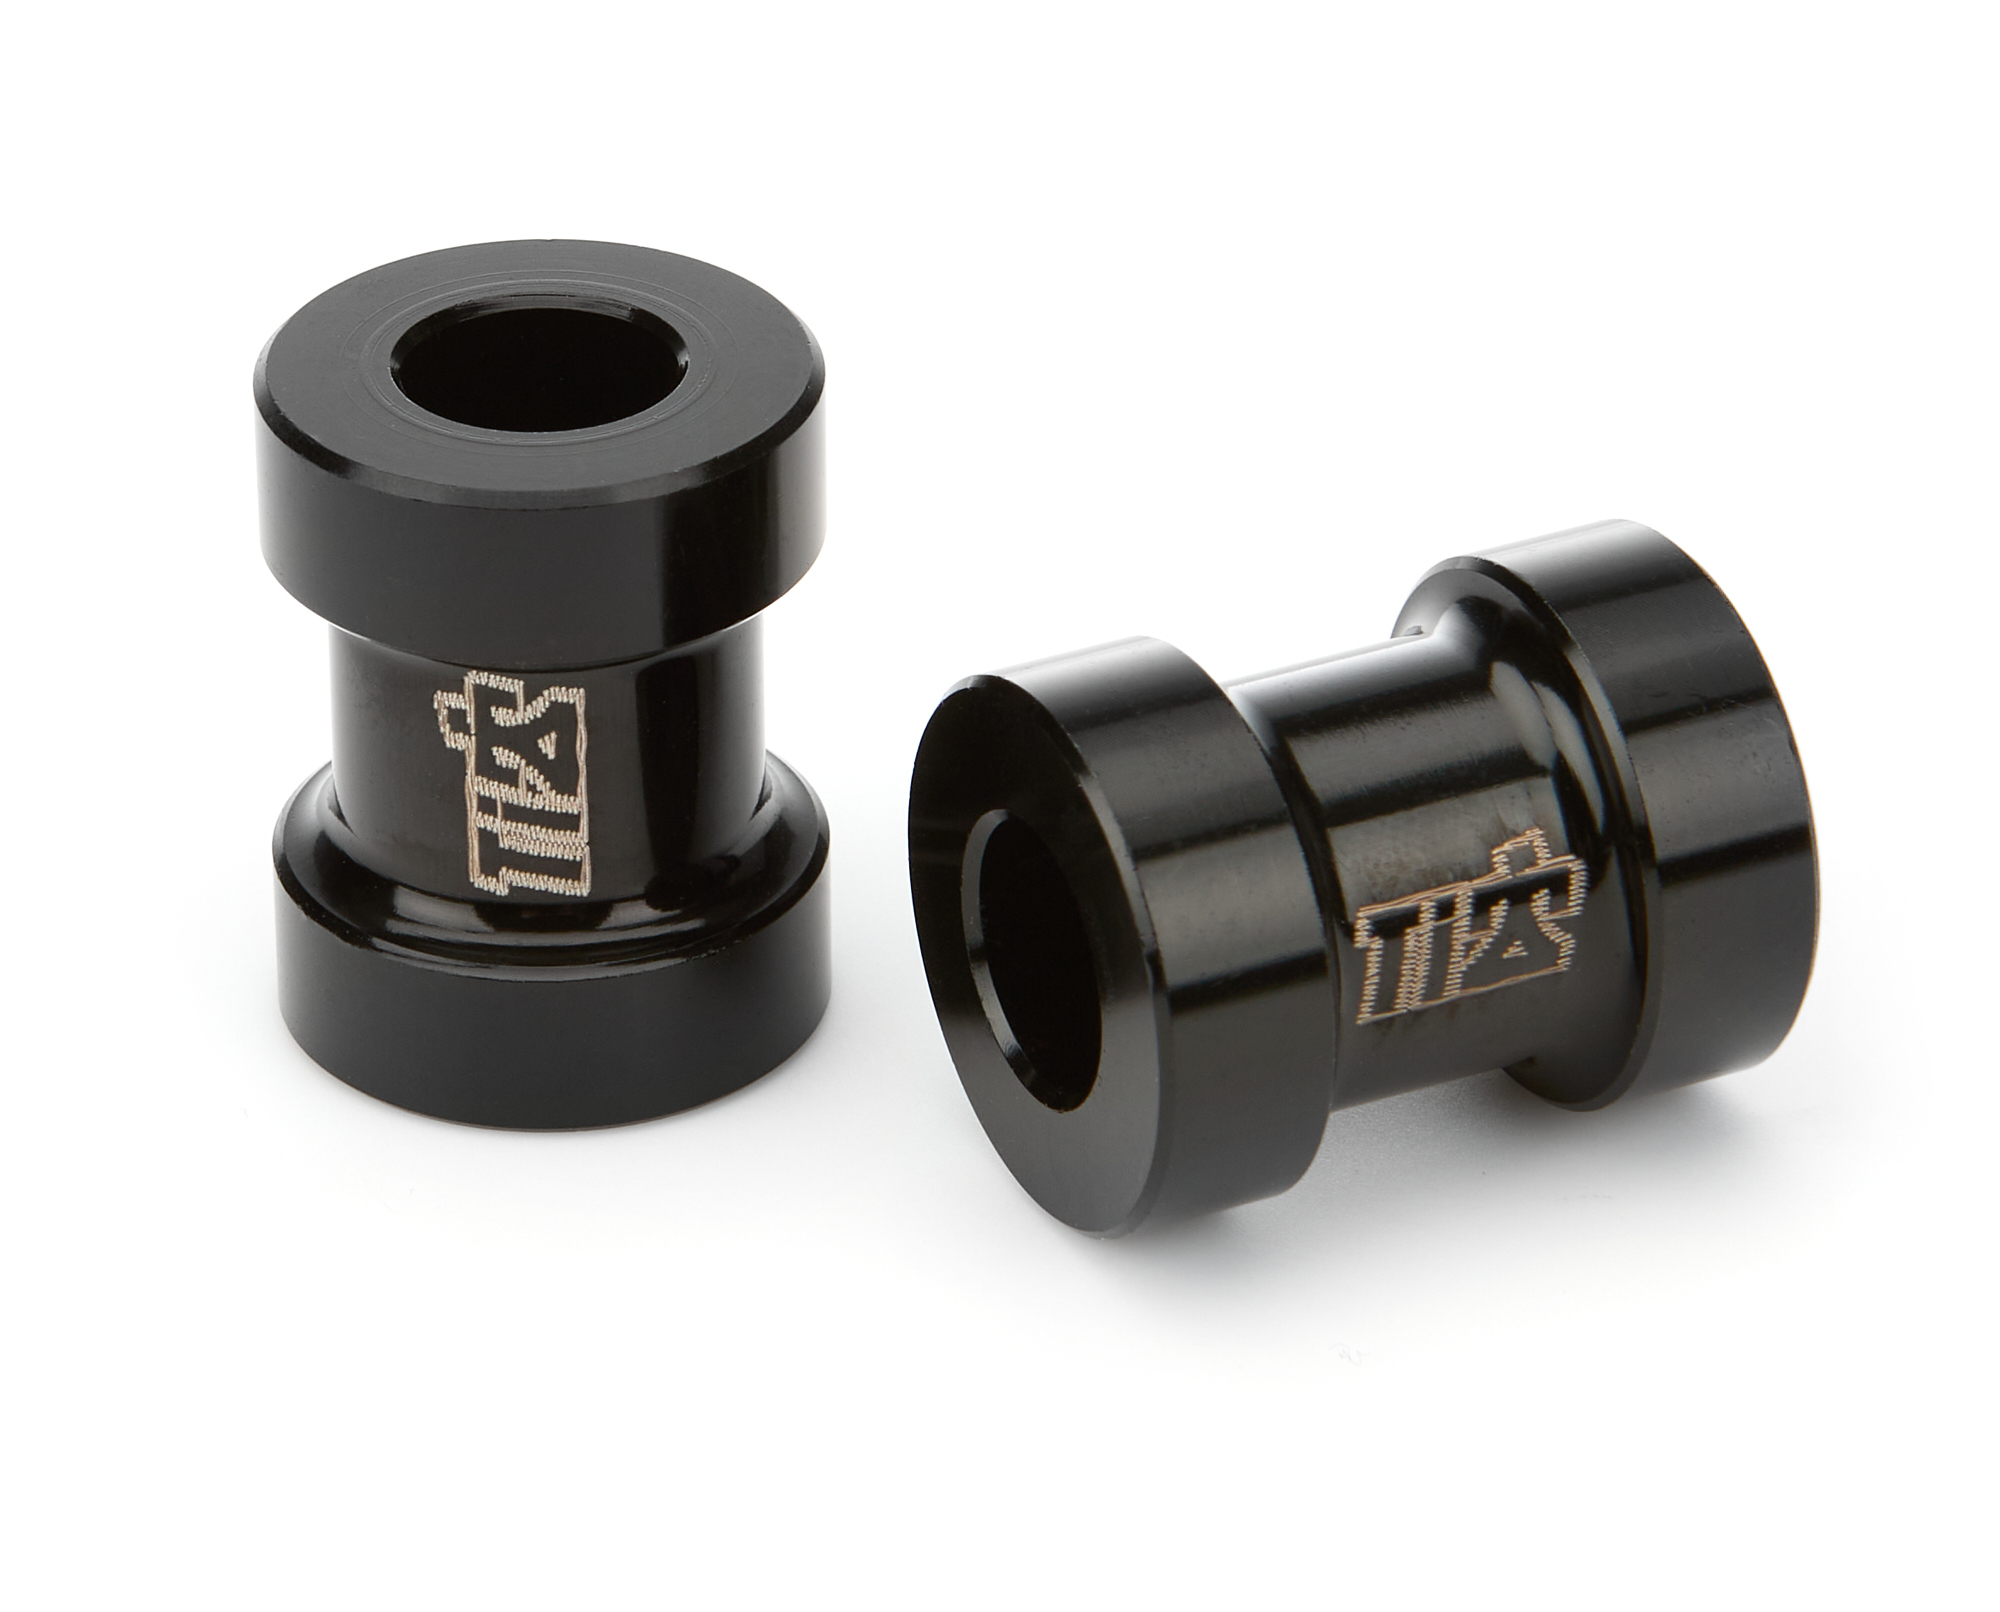 Ti22 Performance 1075 Jacobs Ladder Spacer, 1 in Wide, 3/8 in ID, Aluminum, Black Anodized, Pair